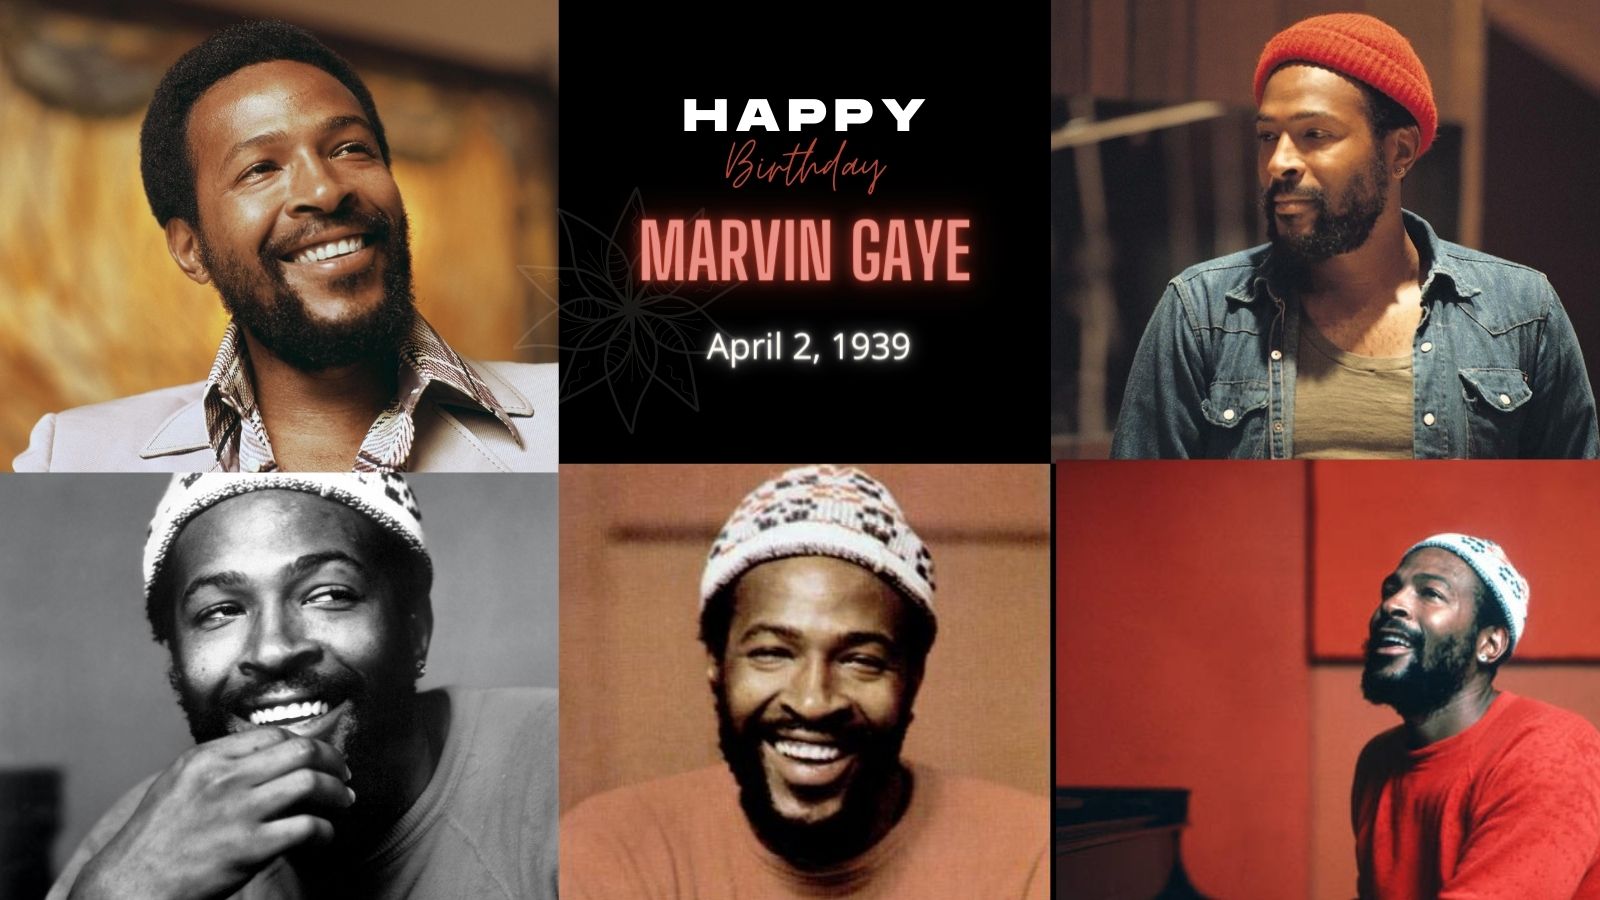 Happy Birthday Marvin Gaye April 2, 1939

He would have been 84 years old.   